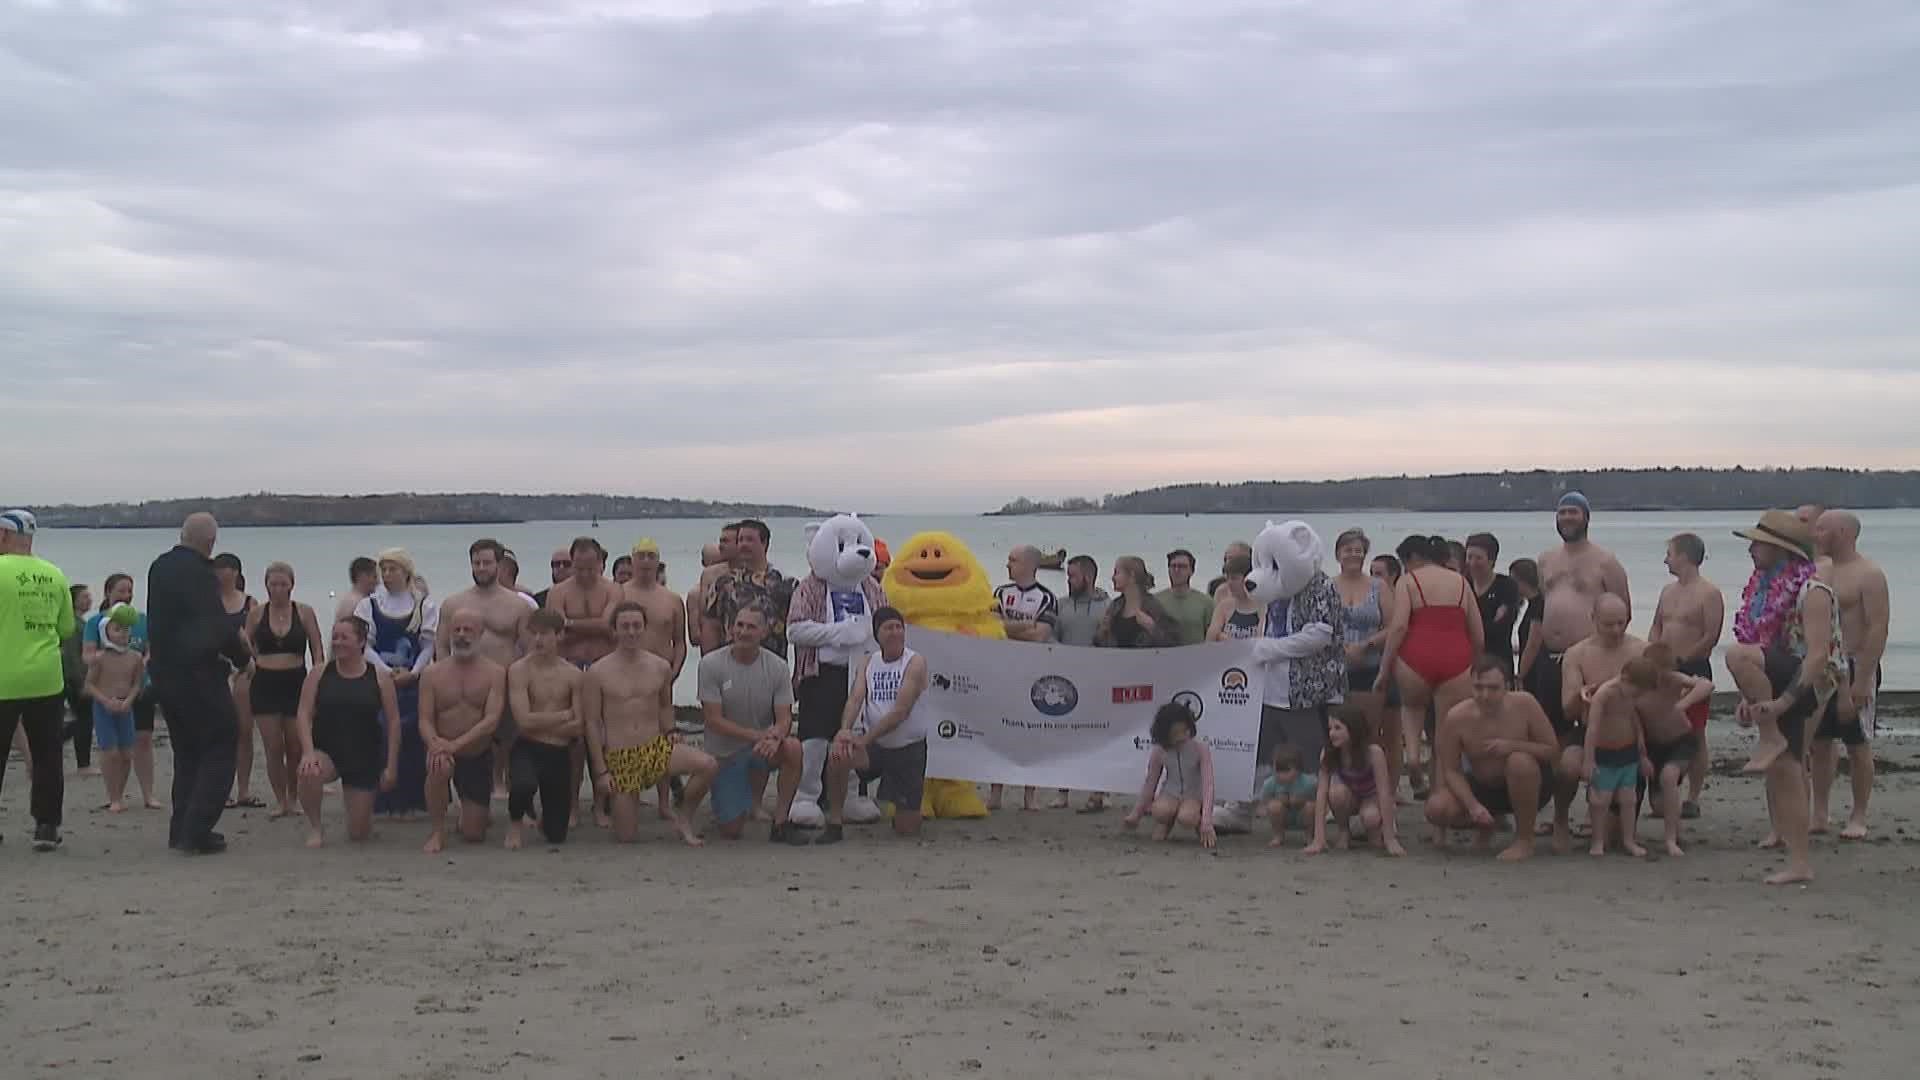 The Natural Resource Council of Maine holds its annual Polar Dip and Dash fundraiser each New Year's Eve.